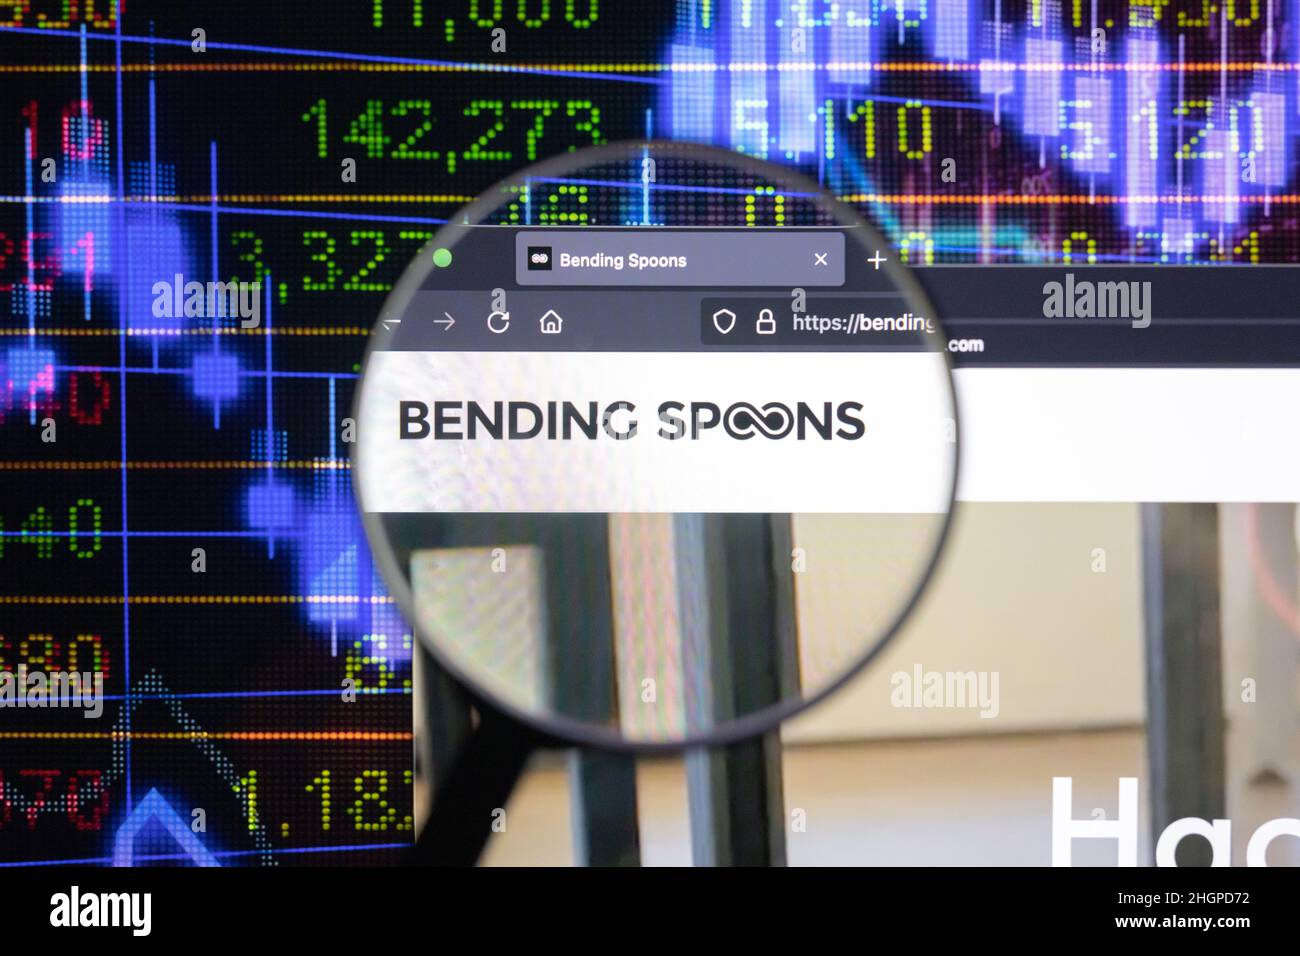 Bending Spoons company logo on a website with blurry stock market developments in the background, seen on a computer screen through a magnifying glass Stock Photo